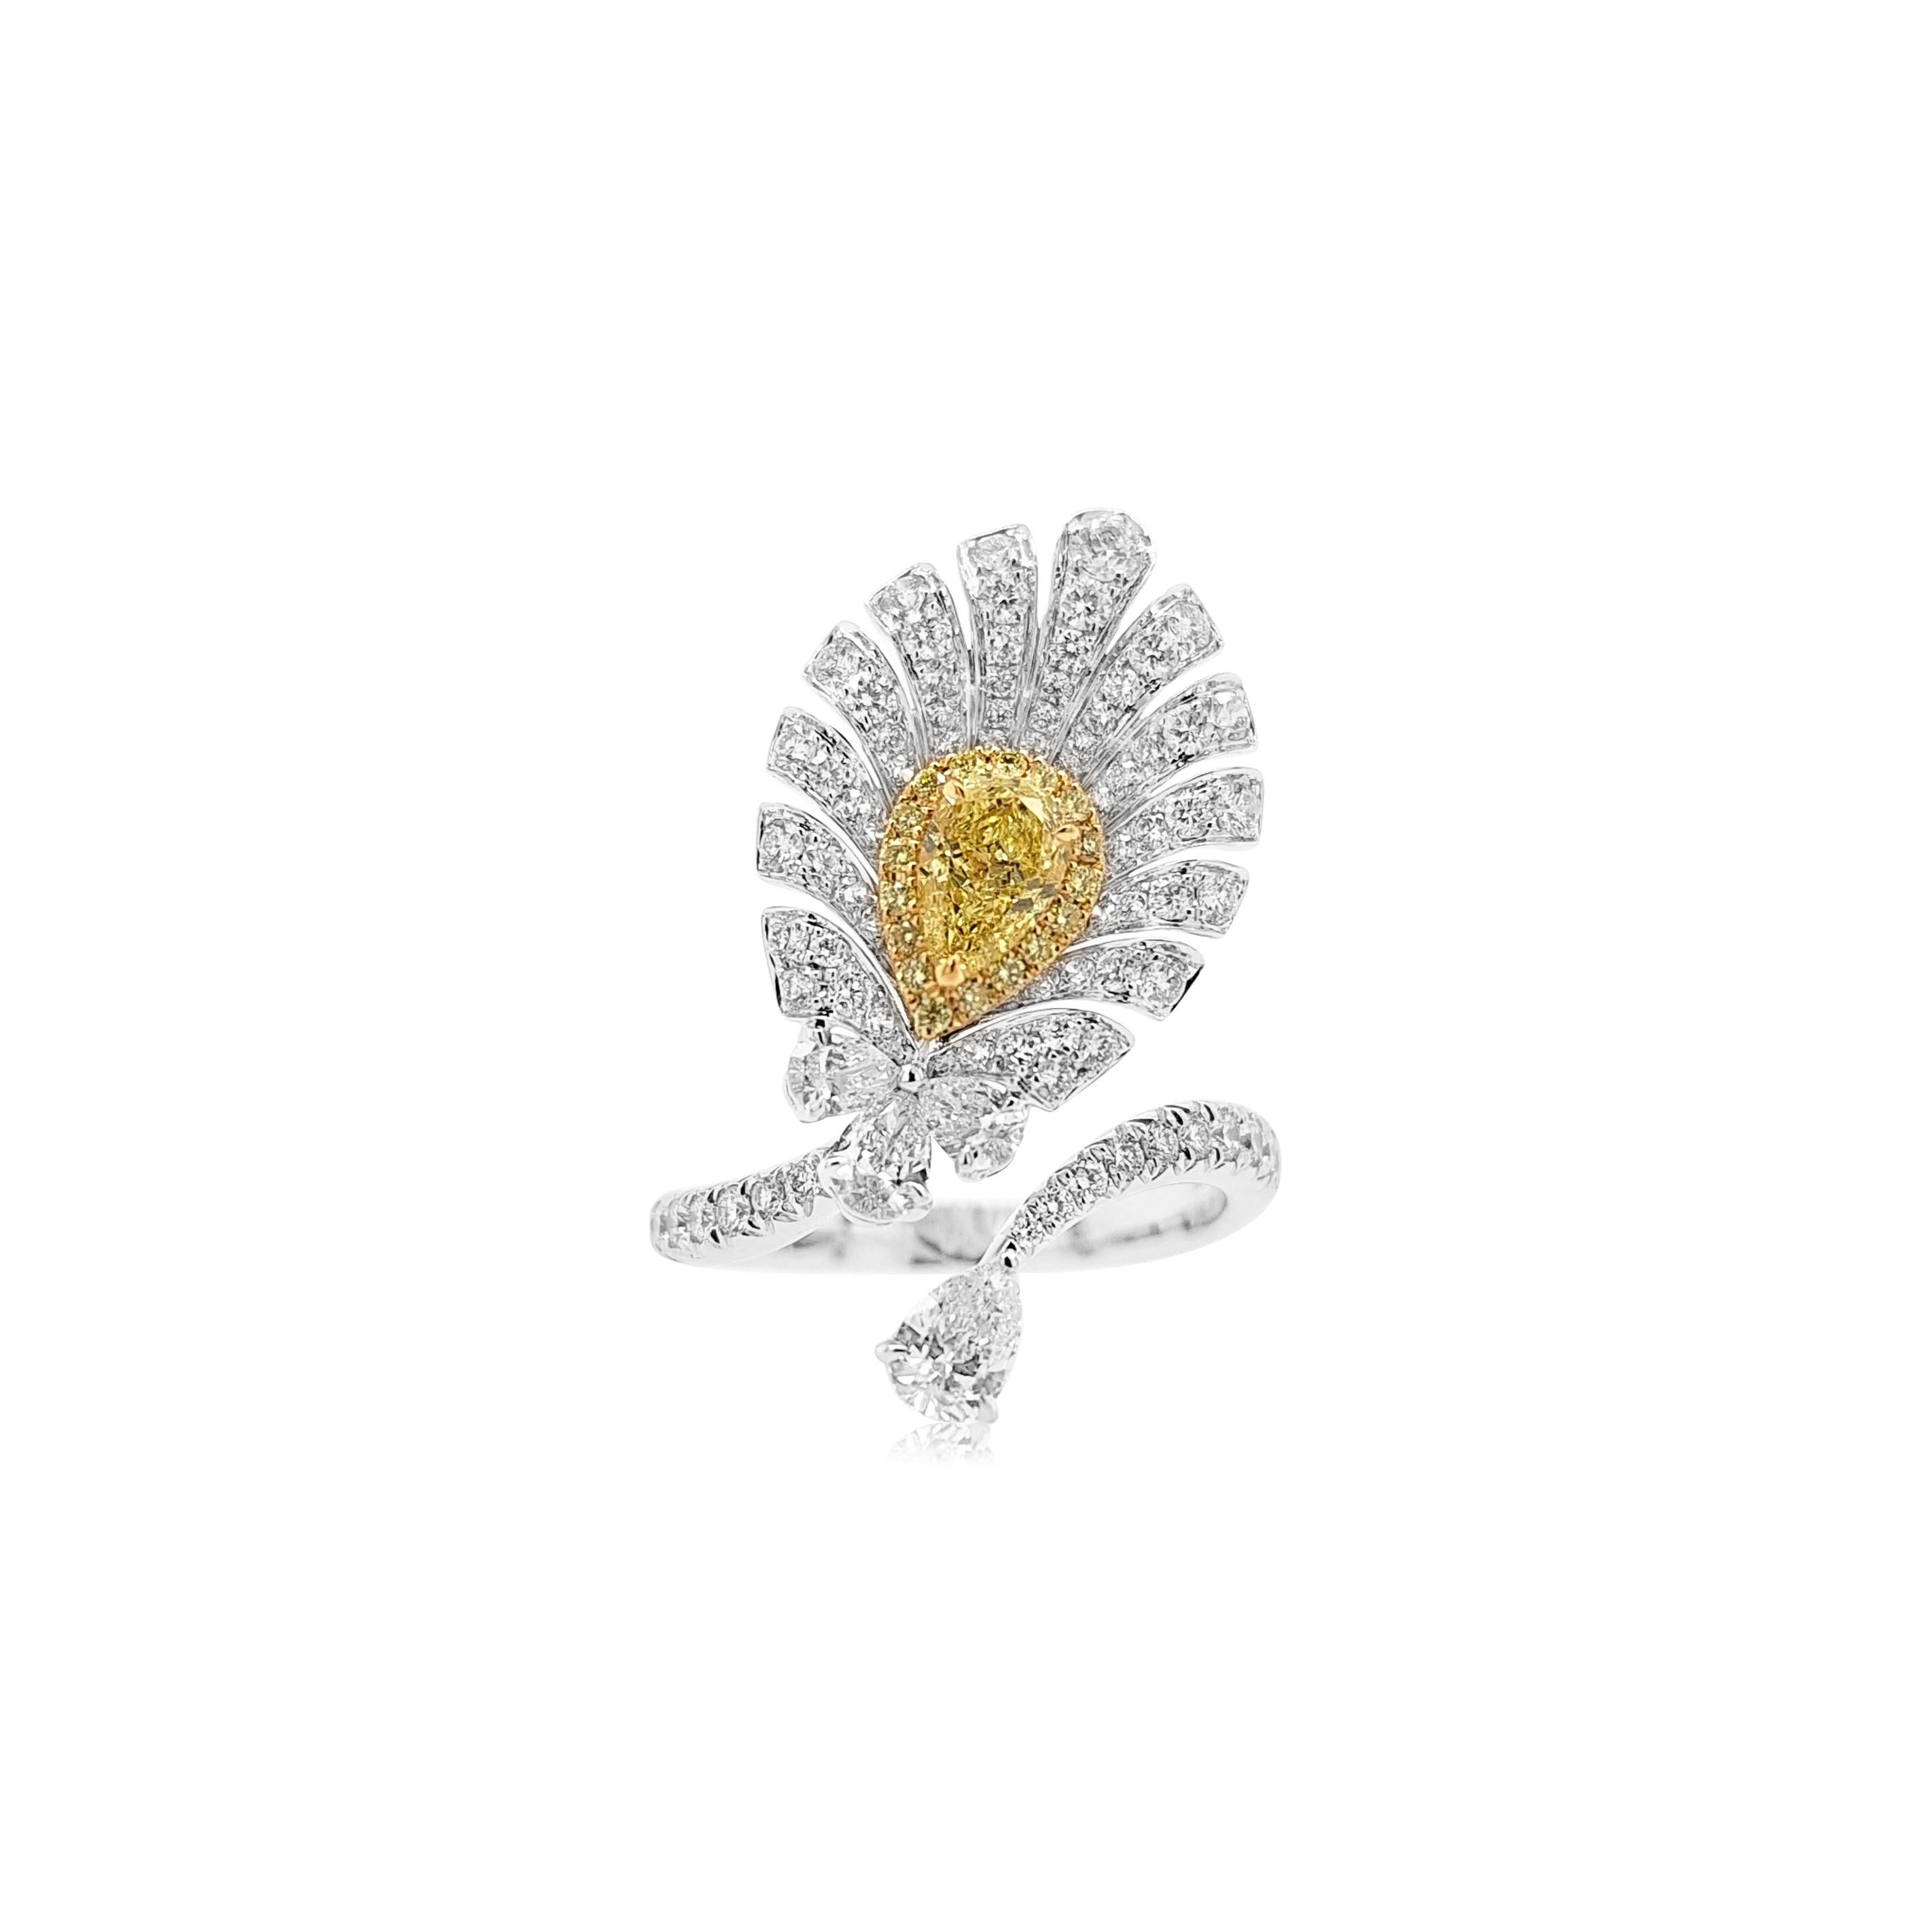 A one-of-a-kind Cocktail ring with a feather-like appearance dazzling with mesmerizing Yellow diamonds and white diamonds

-	Centre Diamond, GIA Certified Pear-shape Yellow Diamond 0.50 carat 
-	Round Brilliant Cut Yellow Diamonds total 0.09